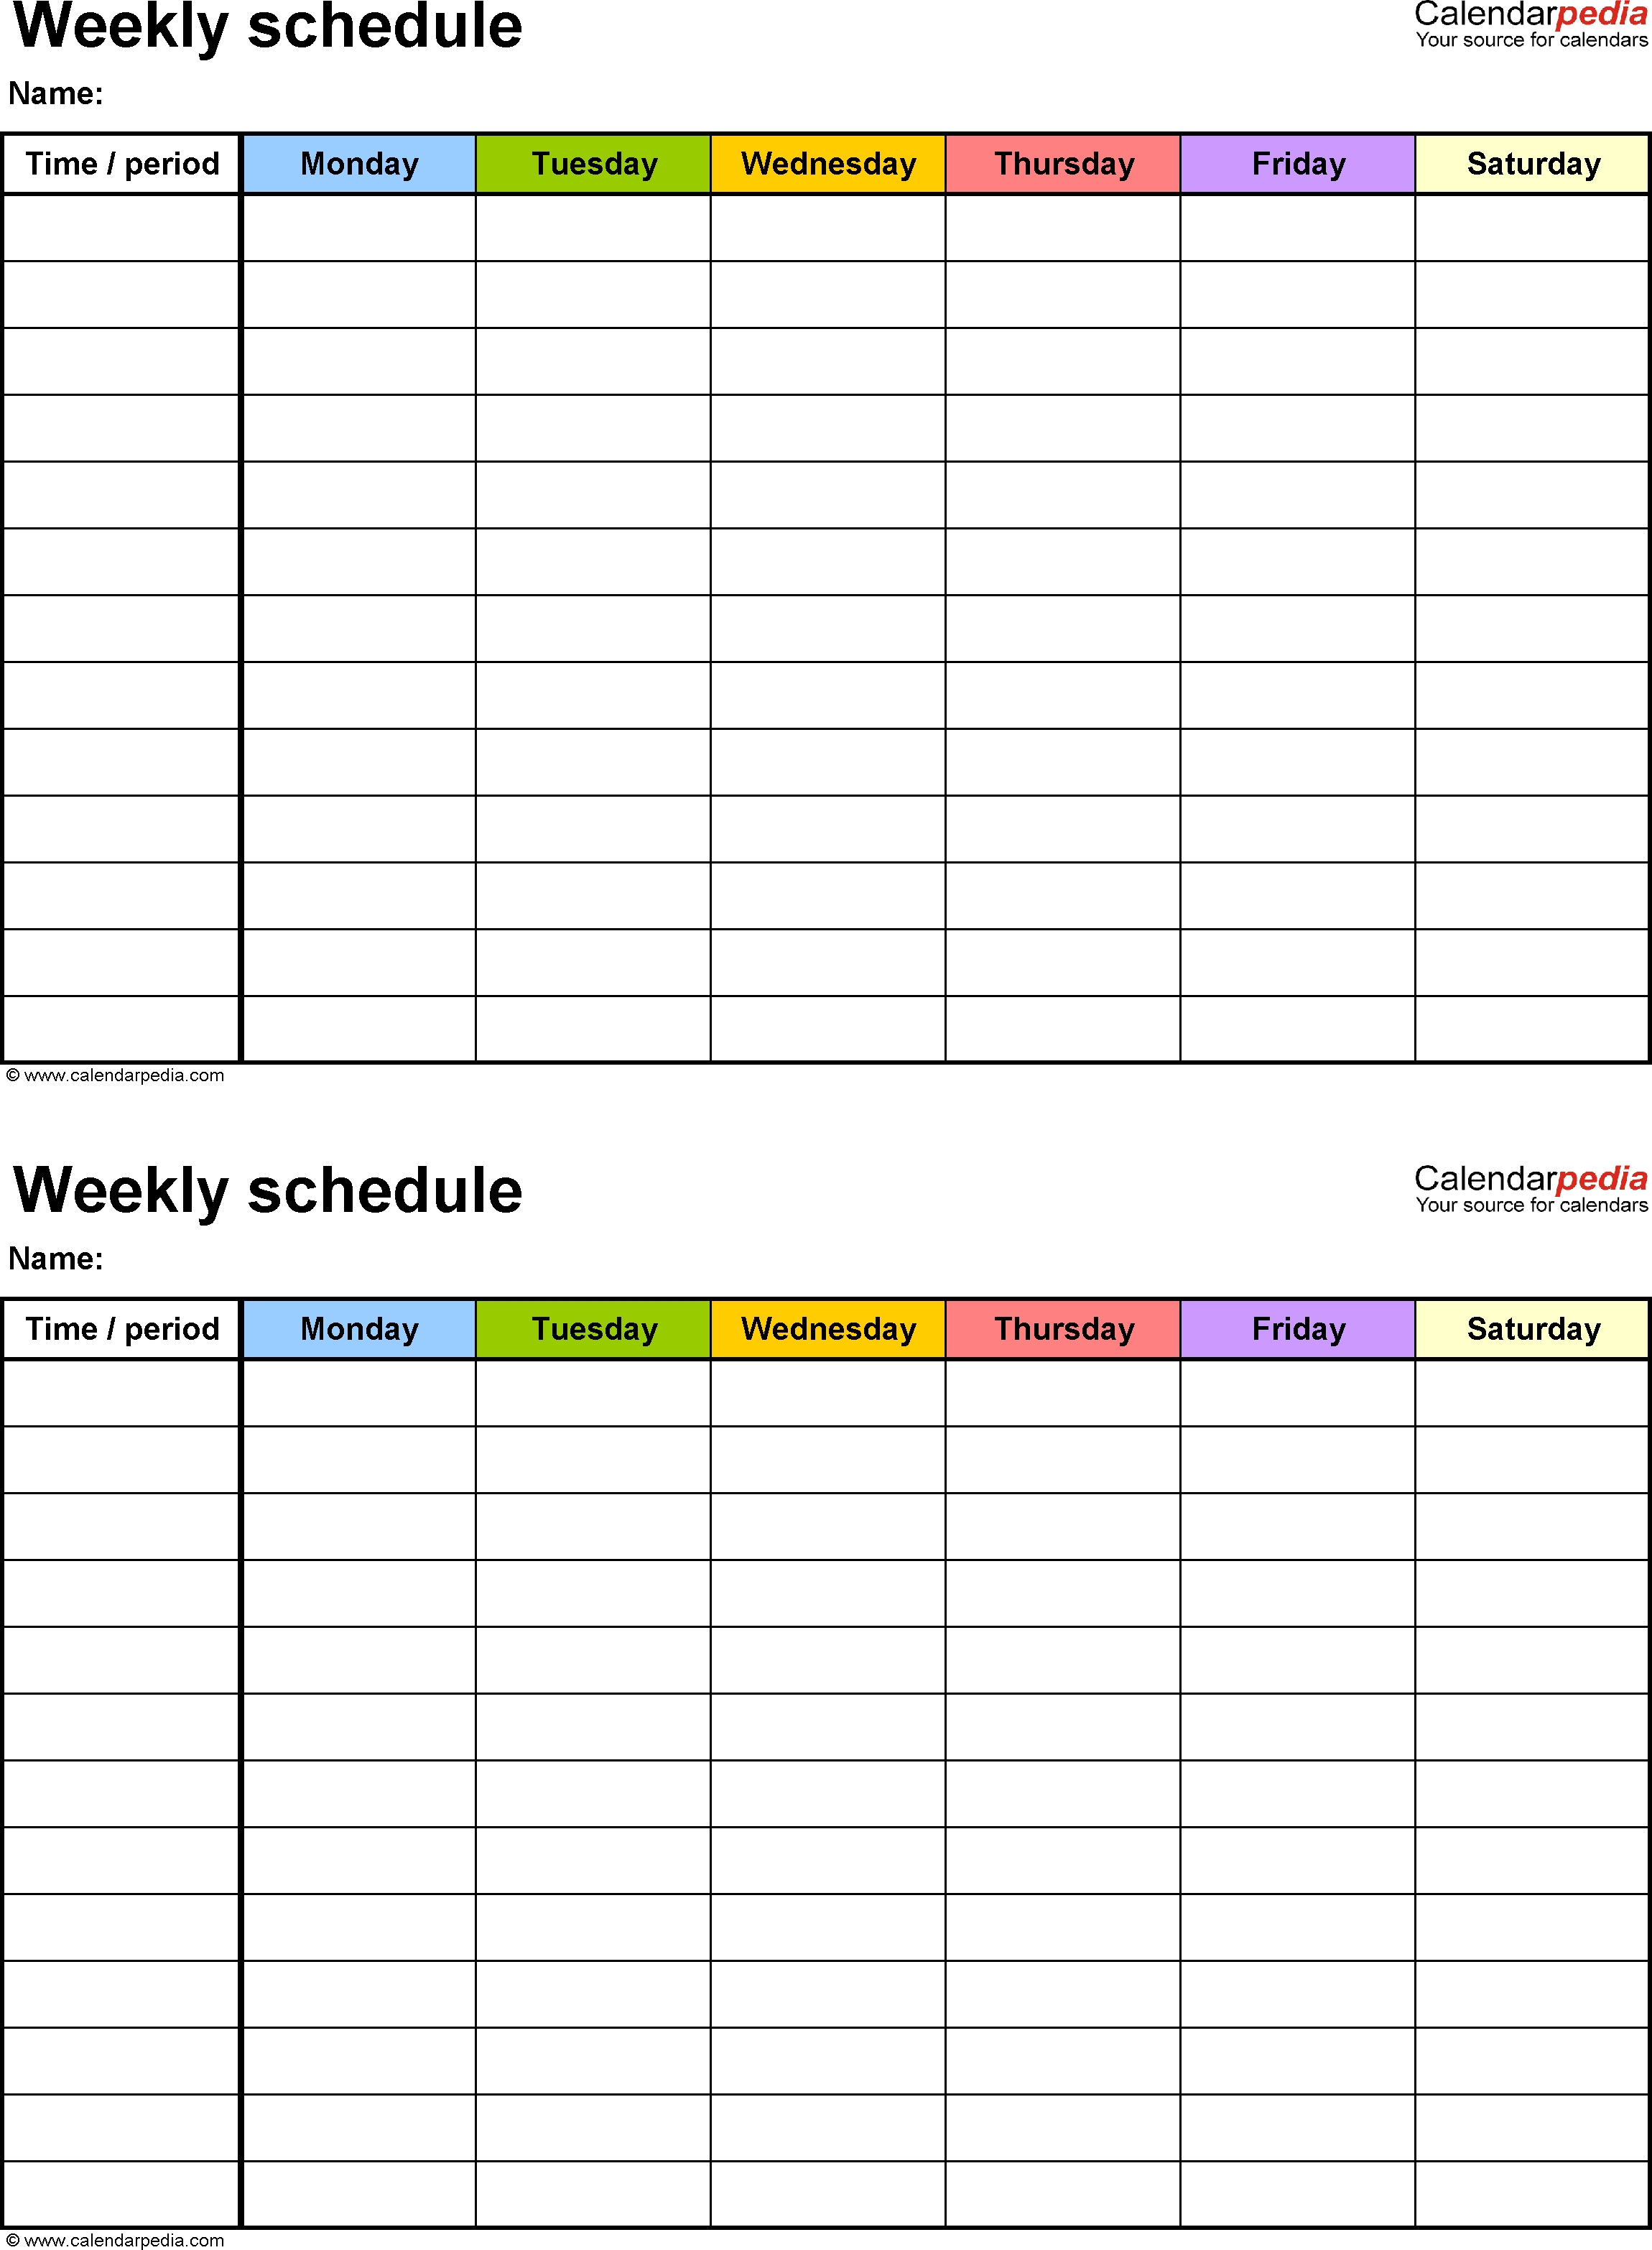 Free Weekly Schedule Templates For Pdf - 18 Templates within Free Printable Weekly Schedule Page